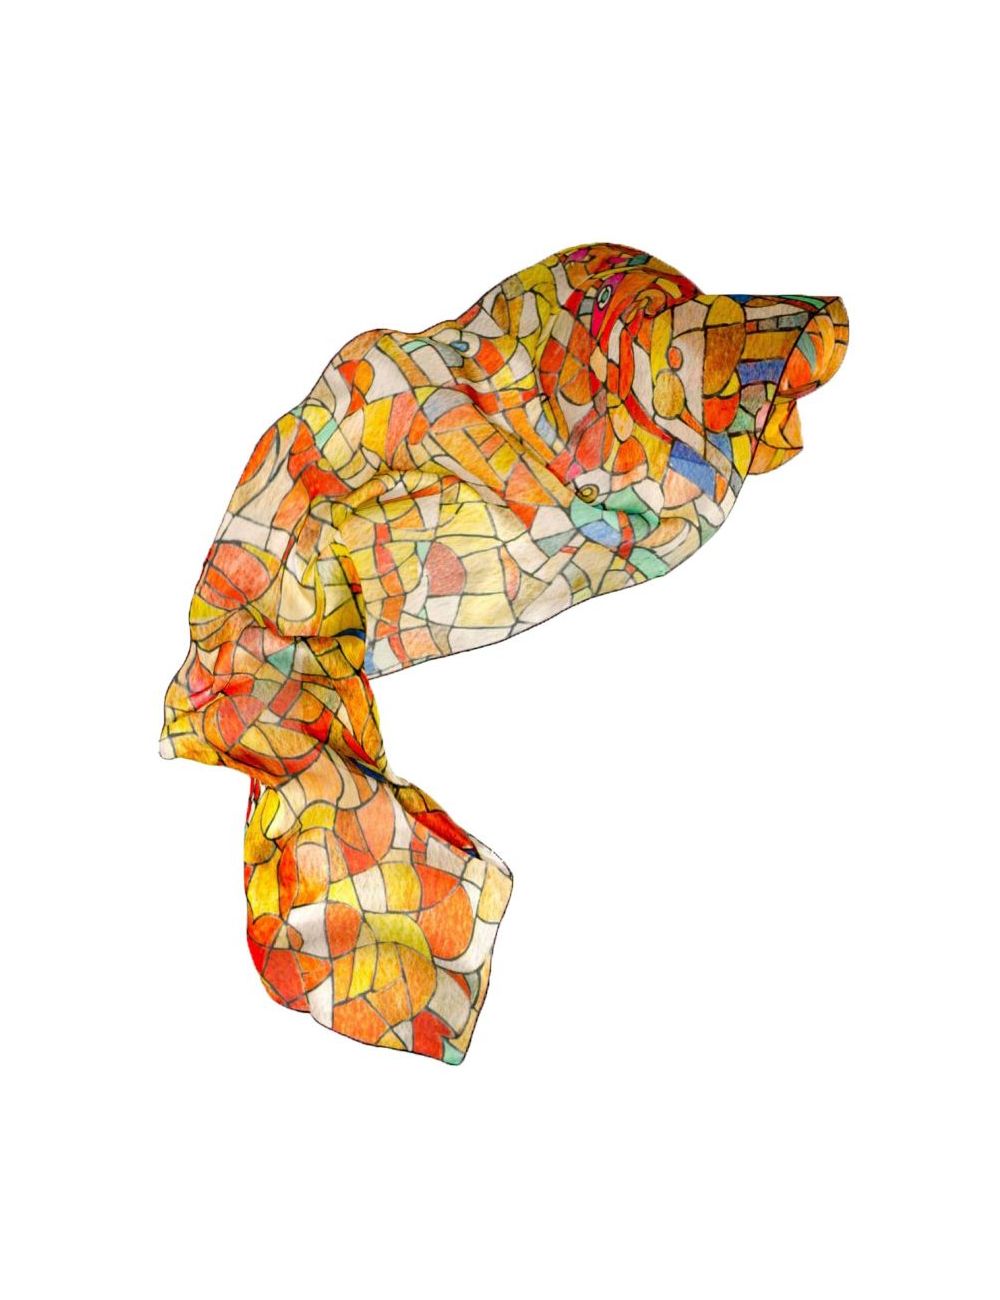 Stained glass light, natural silk scarf, on red and oranges tones.